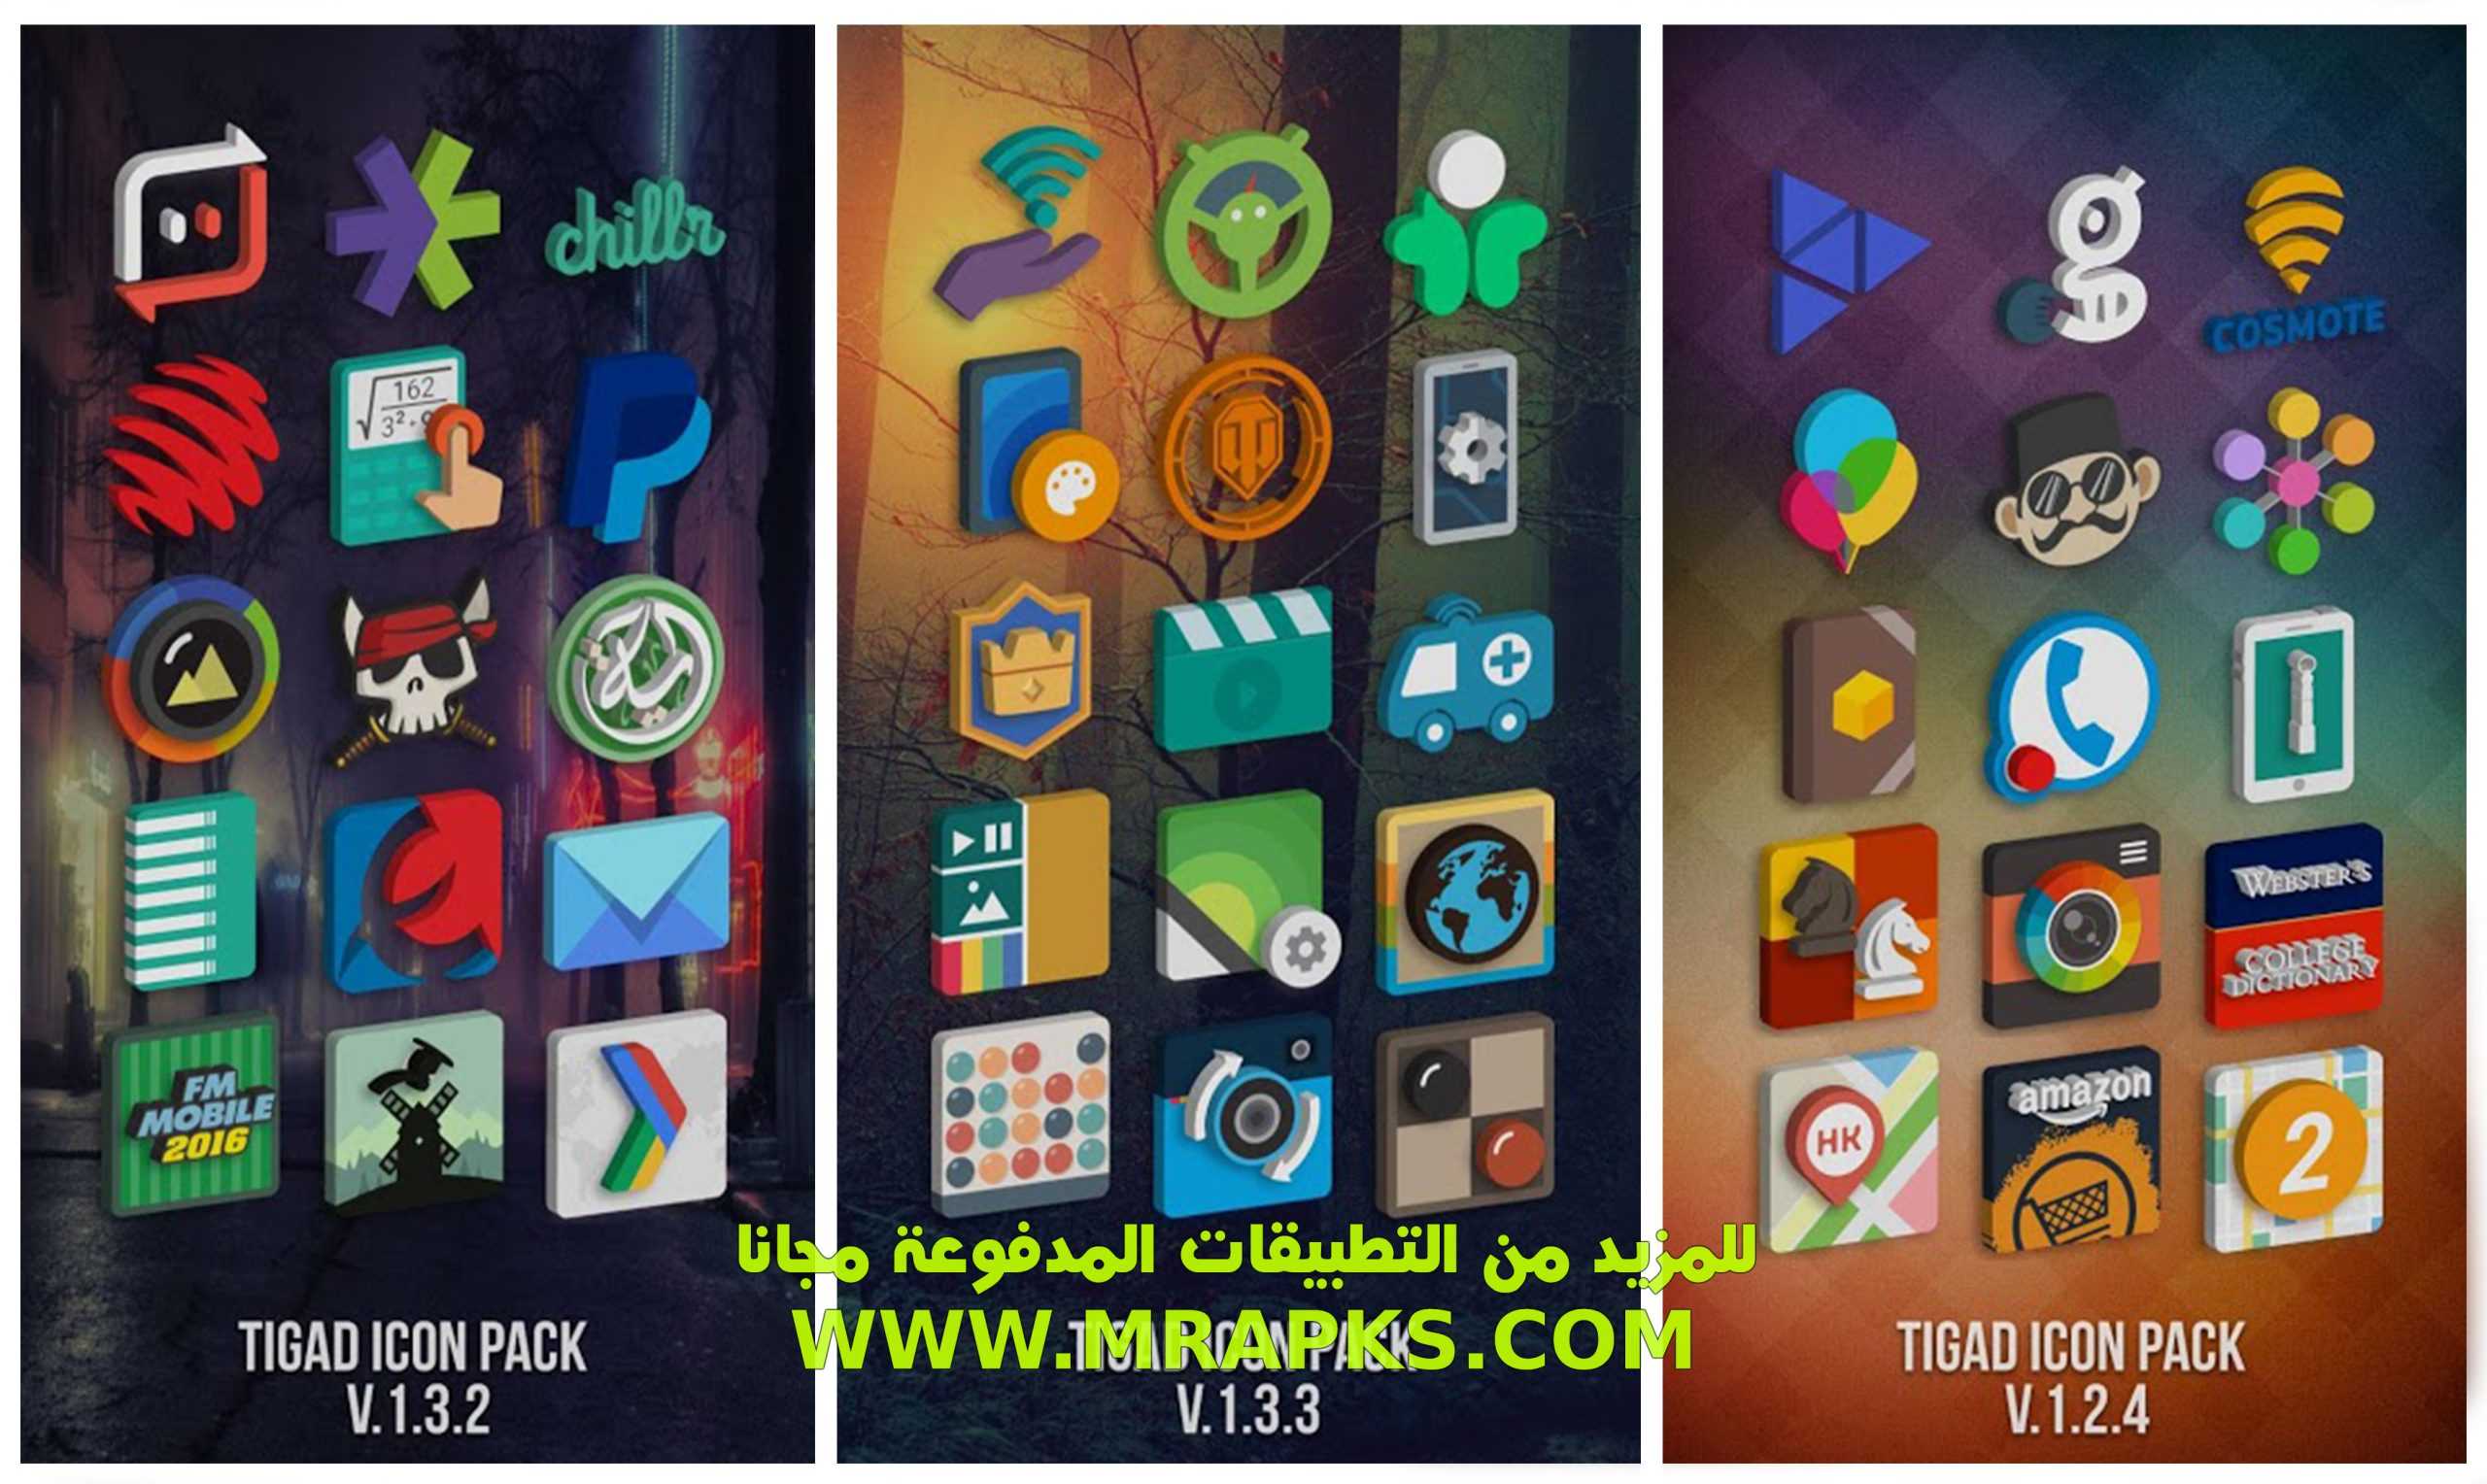 Tigad Pro Icon Pack v2.6.5 (Paid) Apk